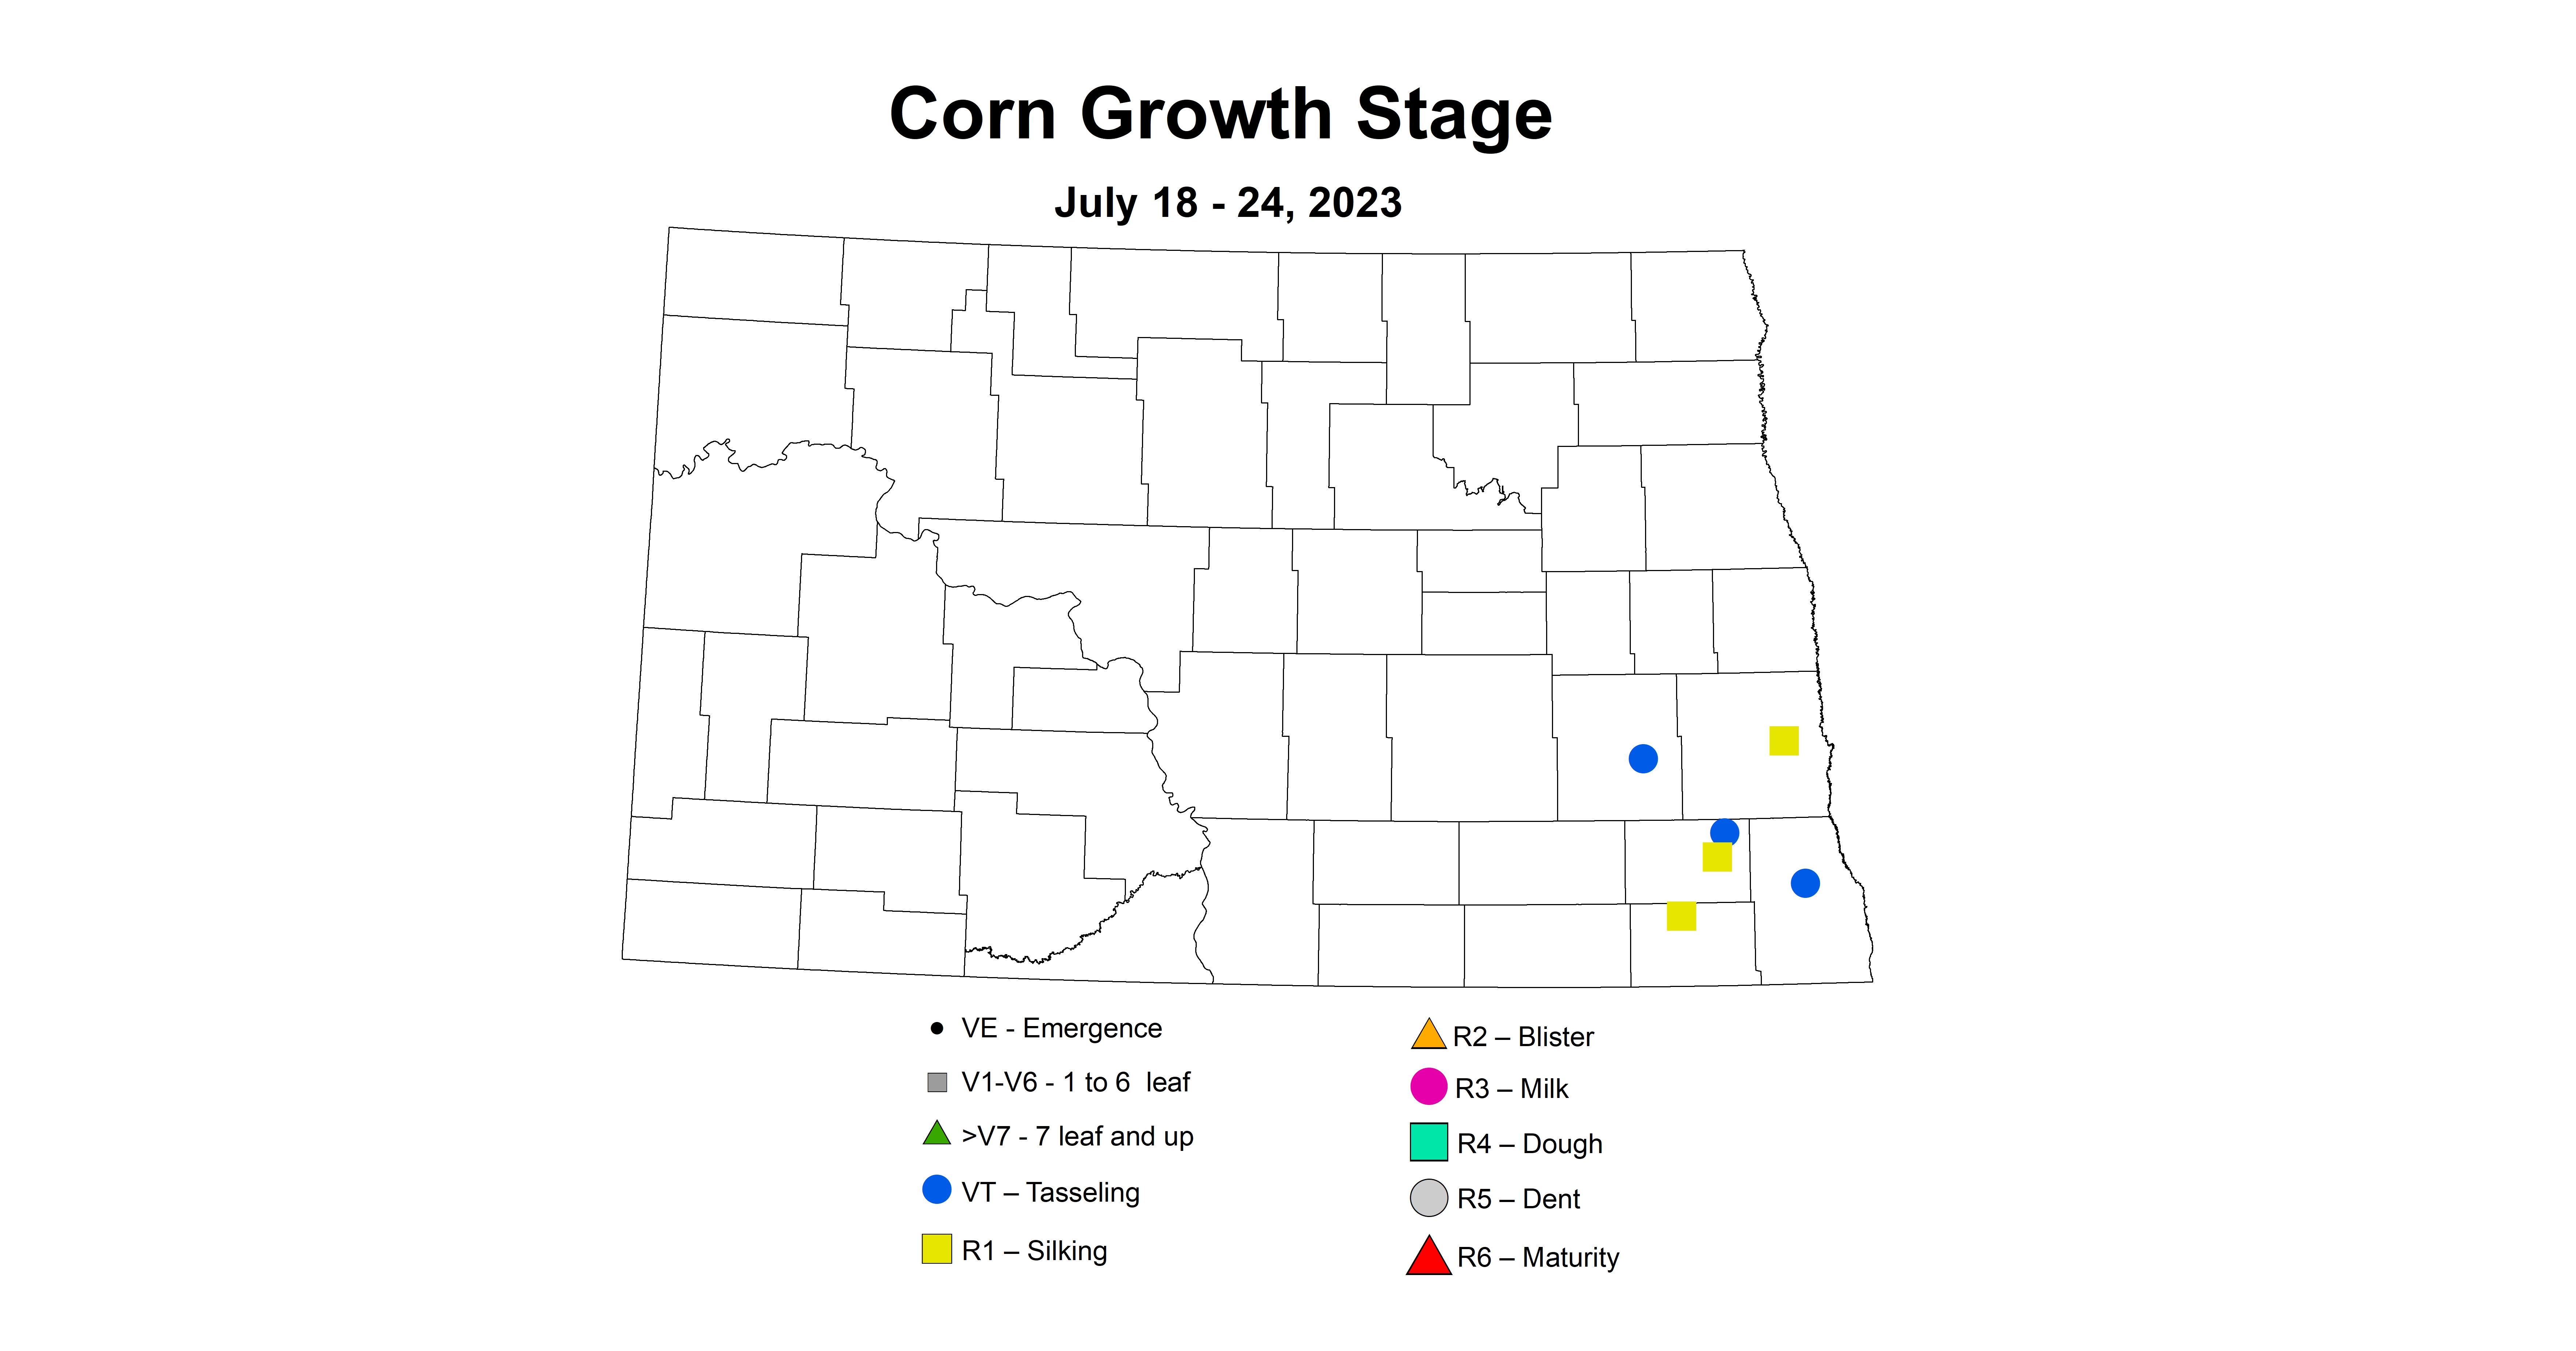 corn growth stages 7.18-7.24 2023